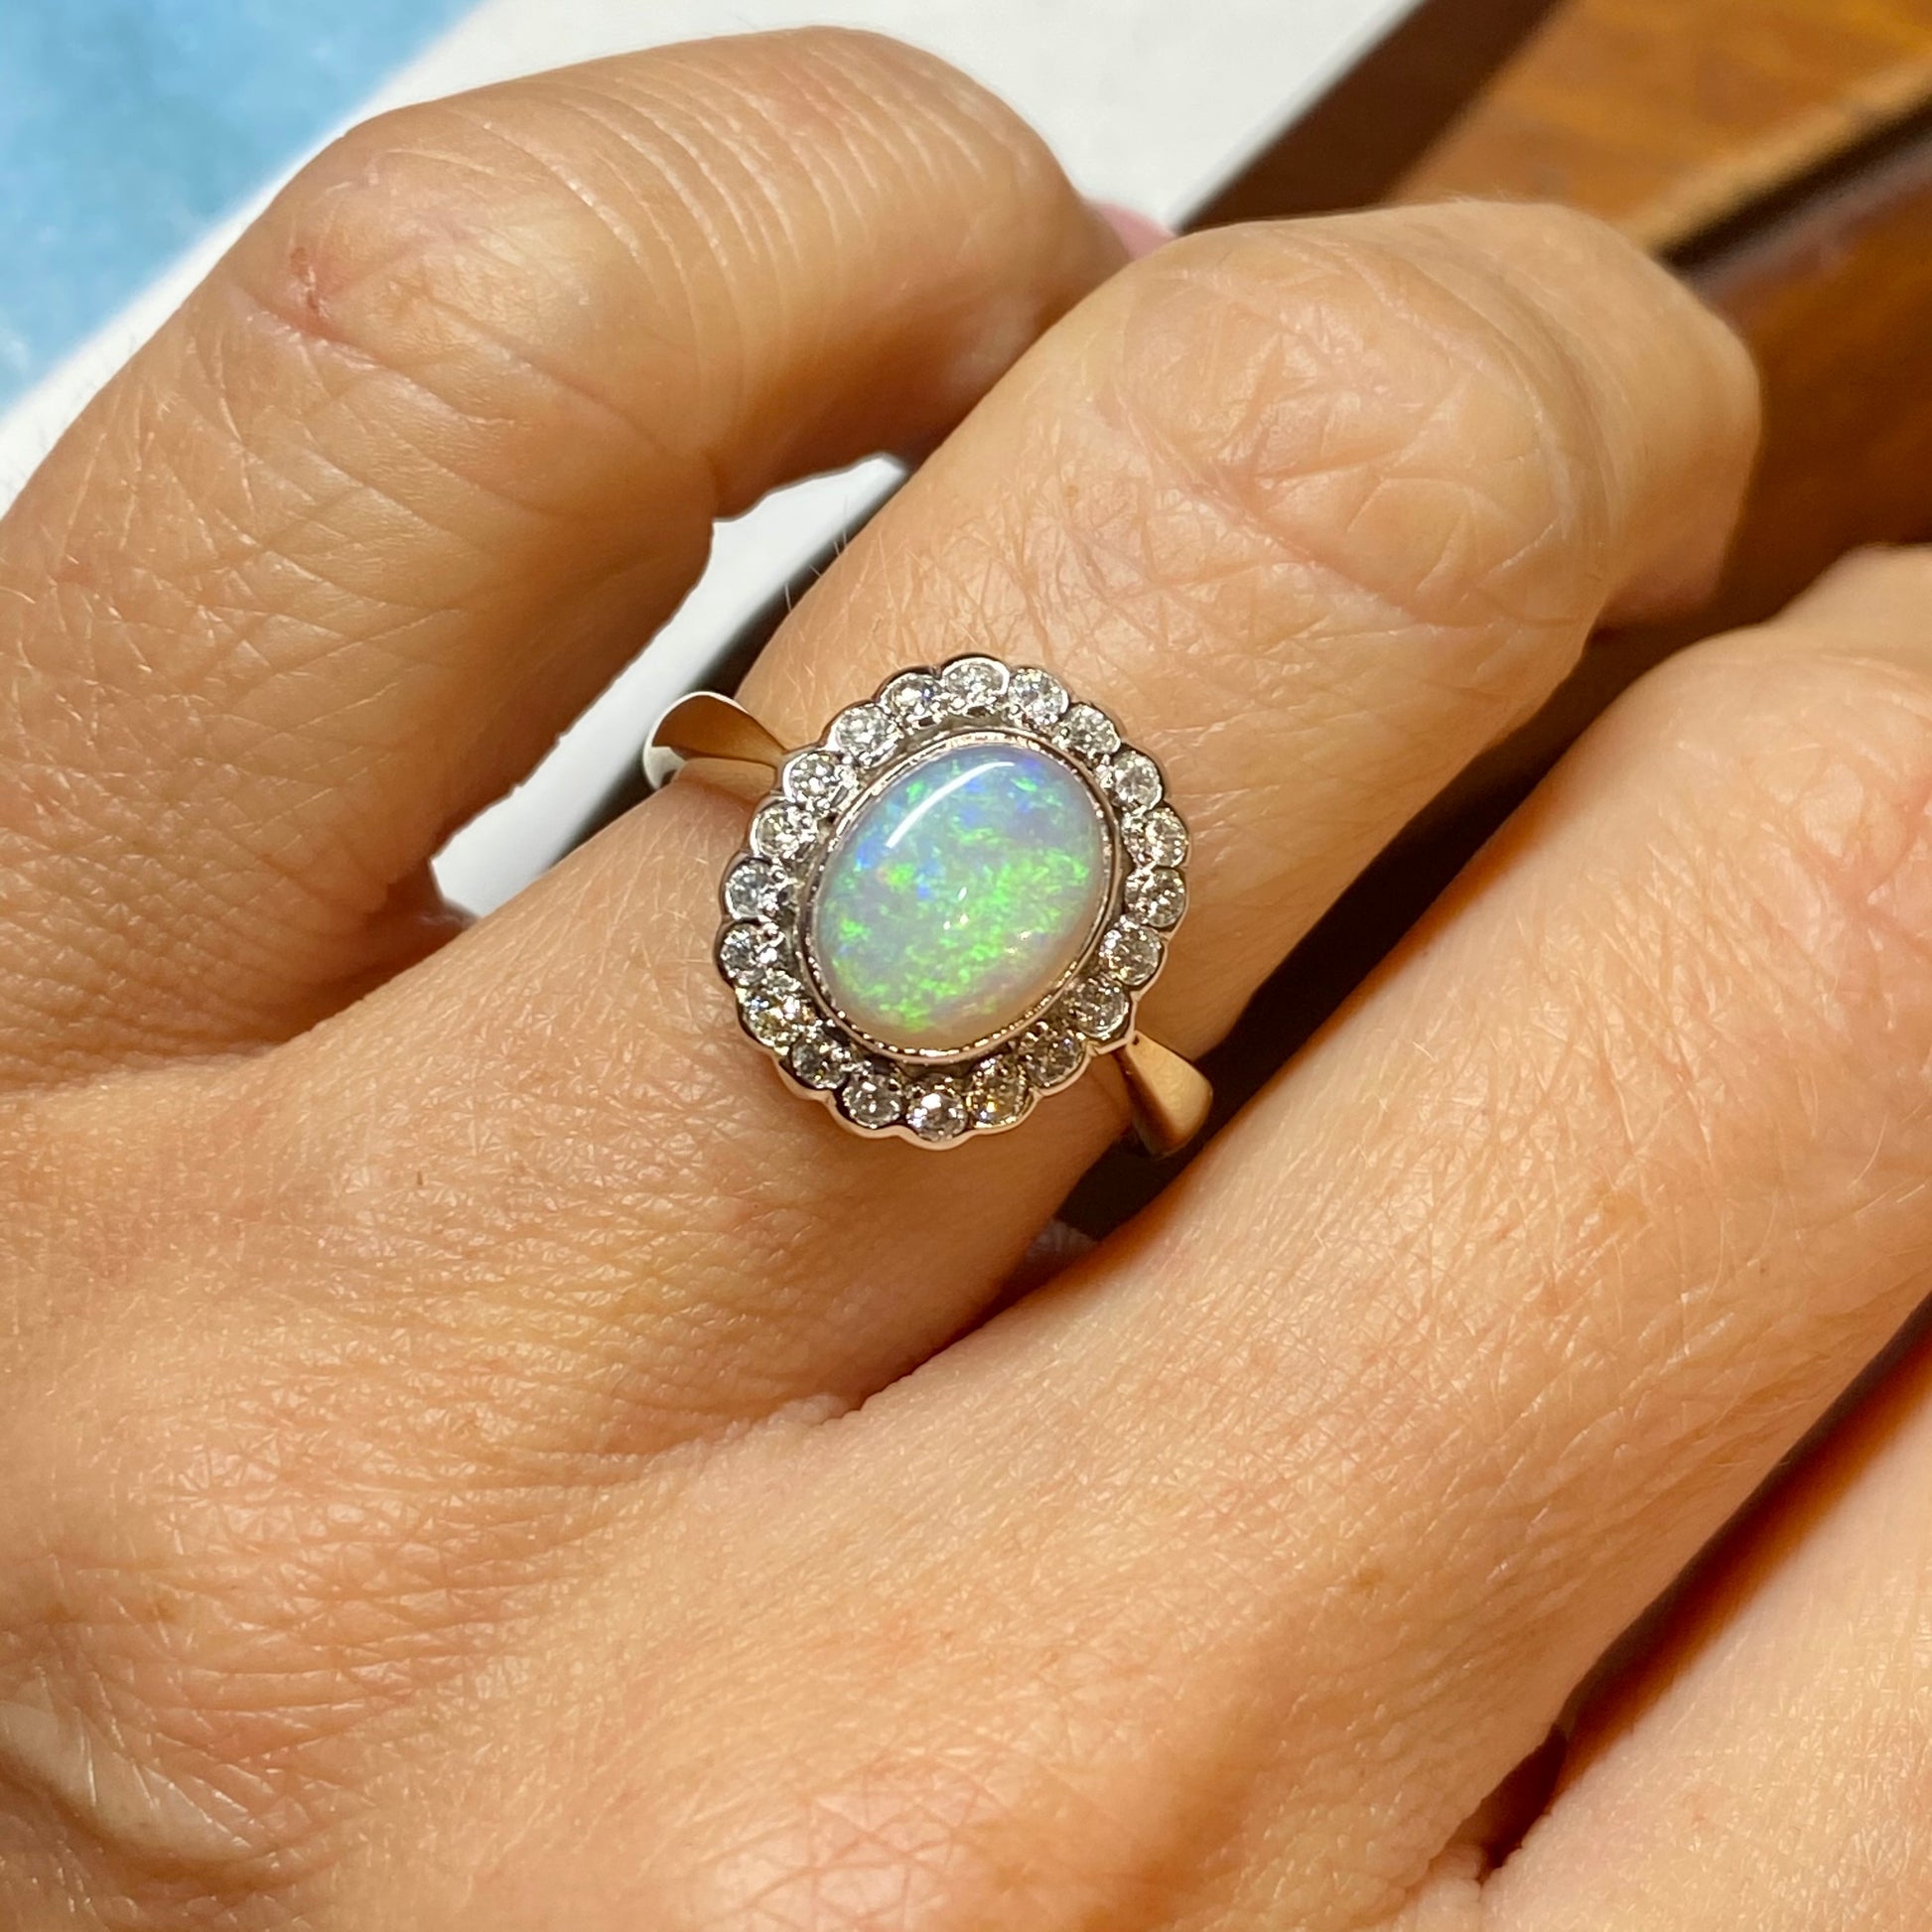 9ct Gold Opal & Diamond Ring  An oval cut gem opal is surrounded by a halo of diamonds with pretty vintage details in white gold.  The band is yellow gold.  9ct yellow gold hallmarked  Dimensions of the setting: 14.5mm x 12mm  This is in stock and ready to ship immediately from our shop in Tralee, Co Kerry, Ireland.  Other sizes from K-T available to order, usually a three week delivery.  Just message us if you need a different size or you would like to pay in instalments.